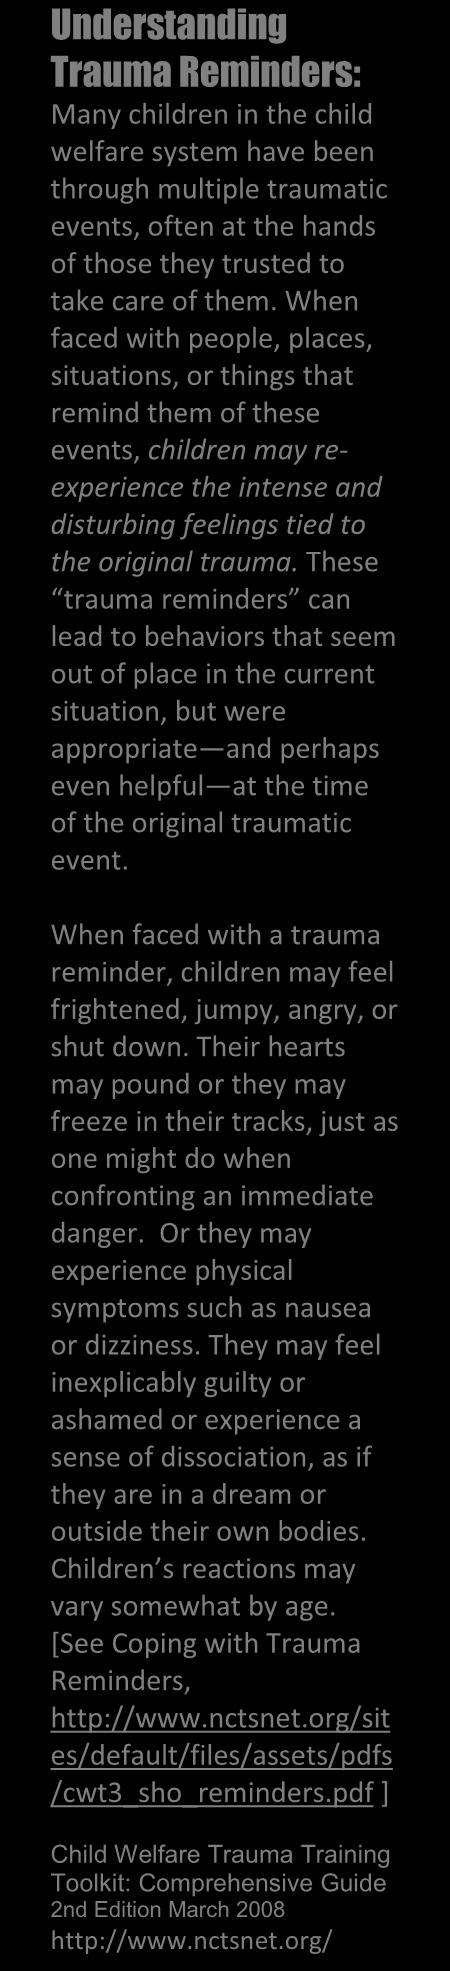 These trauma reminders can lead to behaviors that seem out of place in the current situation, but were appropriate and perhaps even helpful at the time of the original traumatic event.